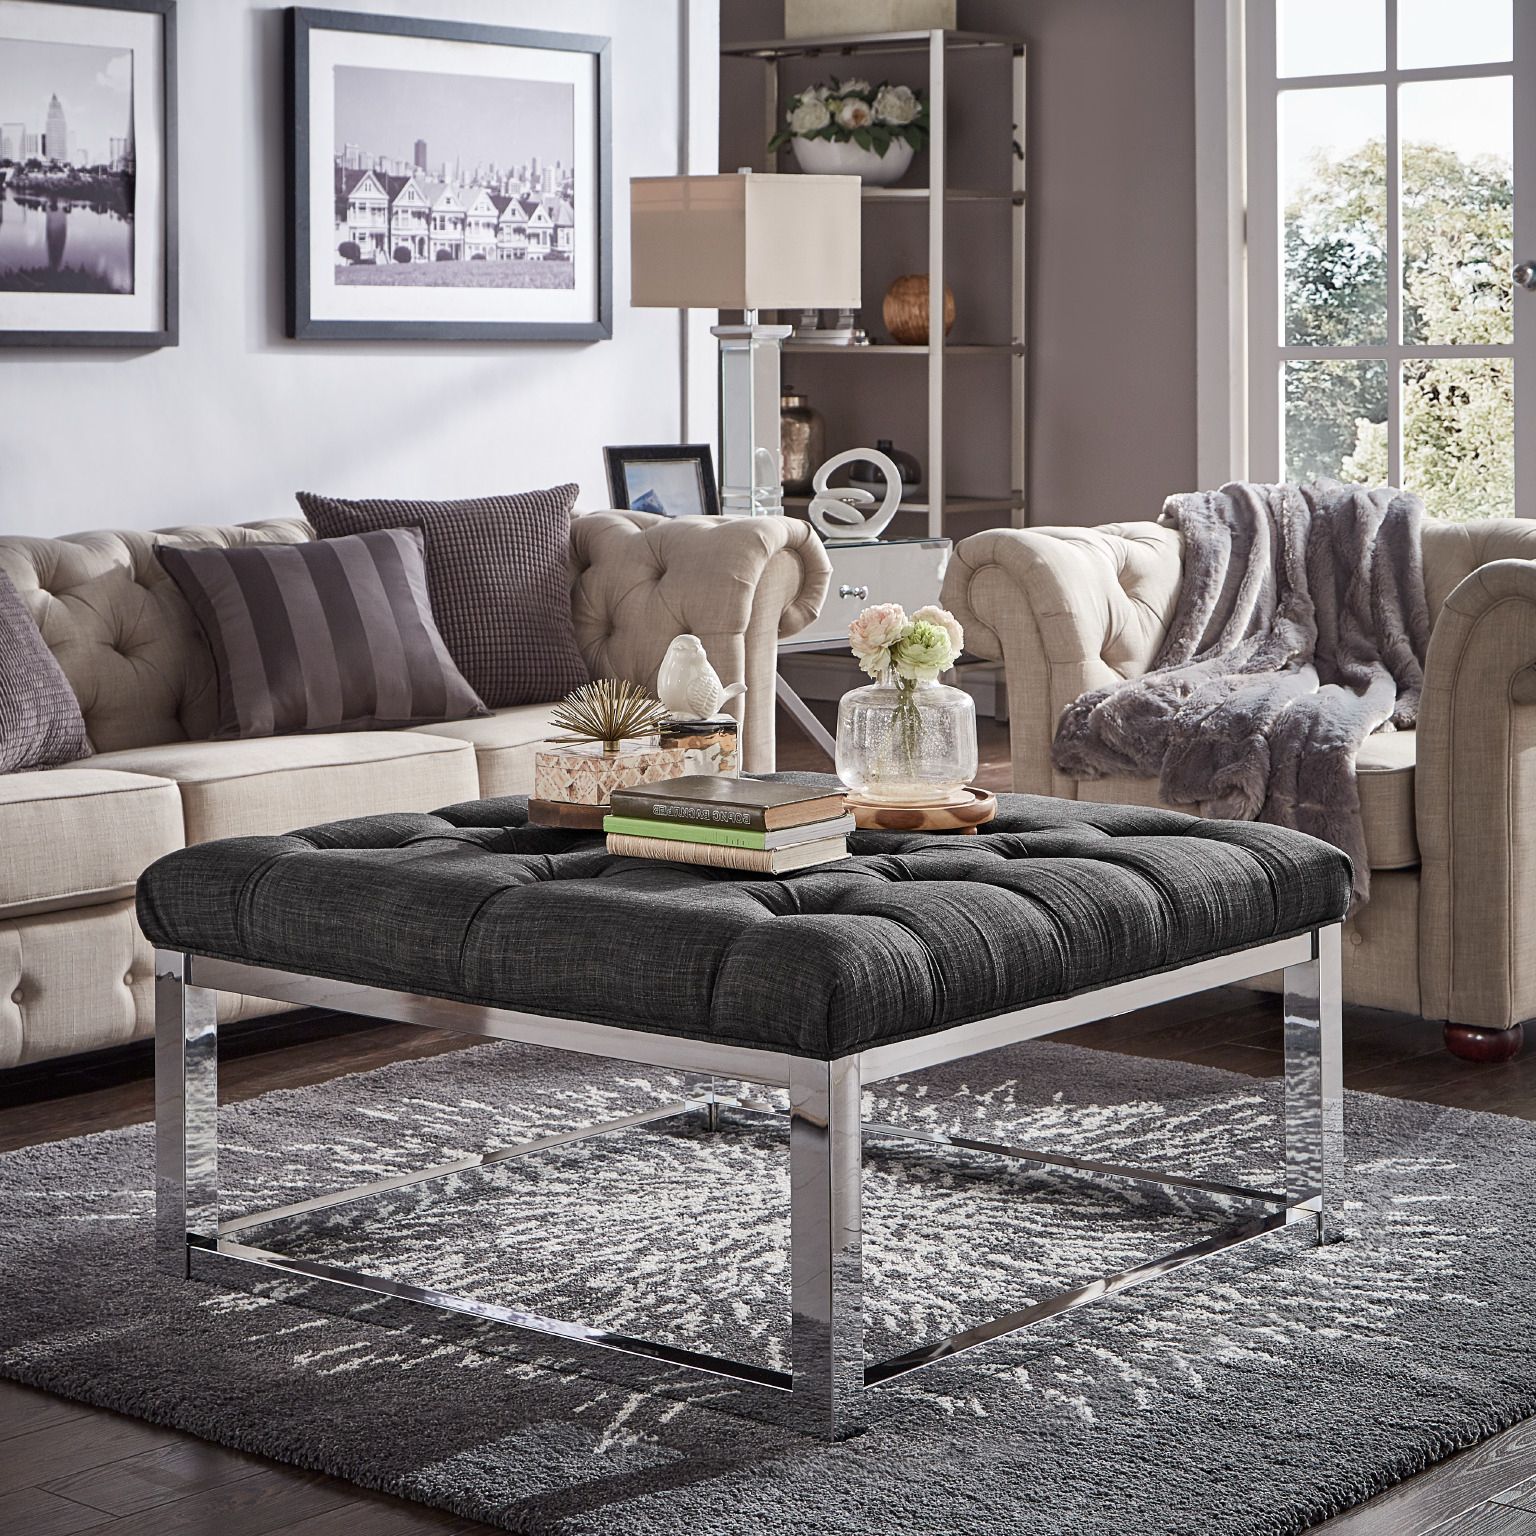 Chrome Metal Ottomans In Fashionable Weston Home Libby Button Tufted Cushion Ottoman Coffee Table With (View 2 of 10)